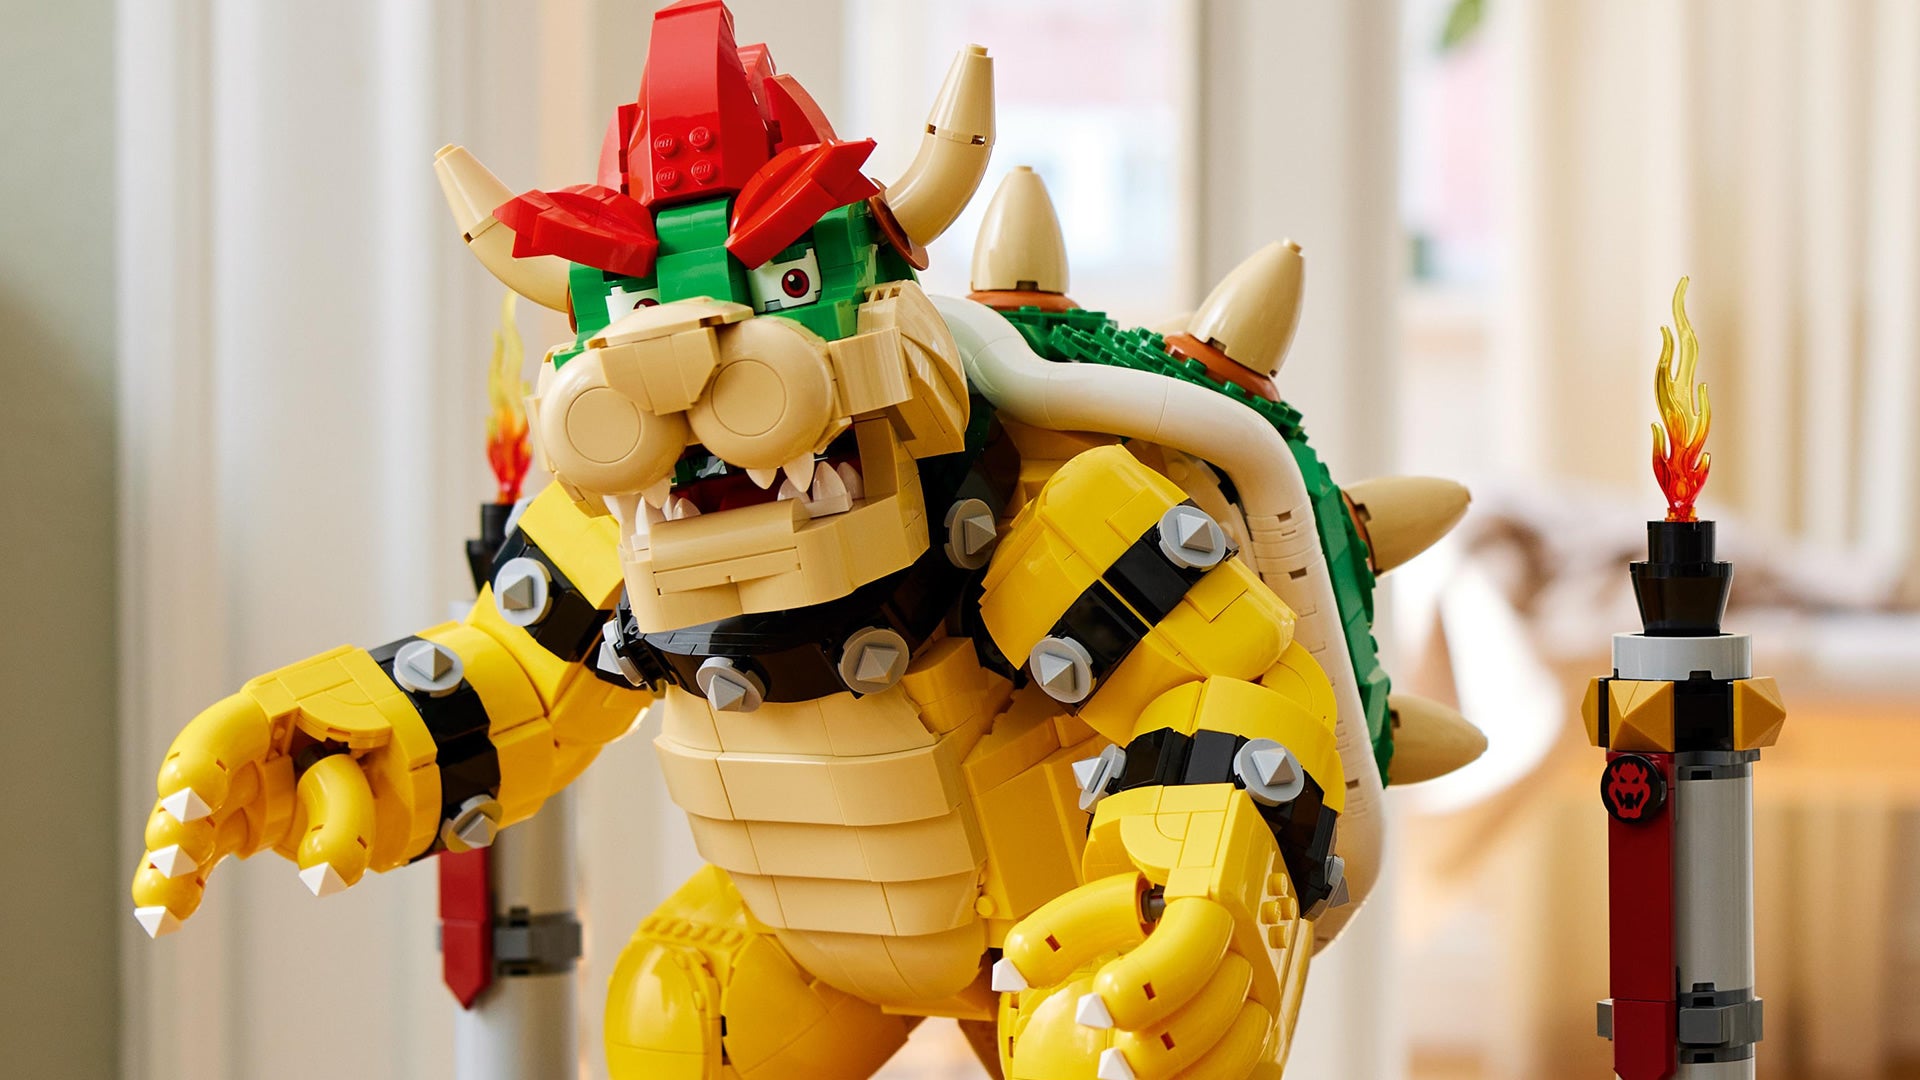 Lego Super Mario's latest set is a gigantic figure of Bowser | VG247